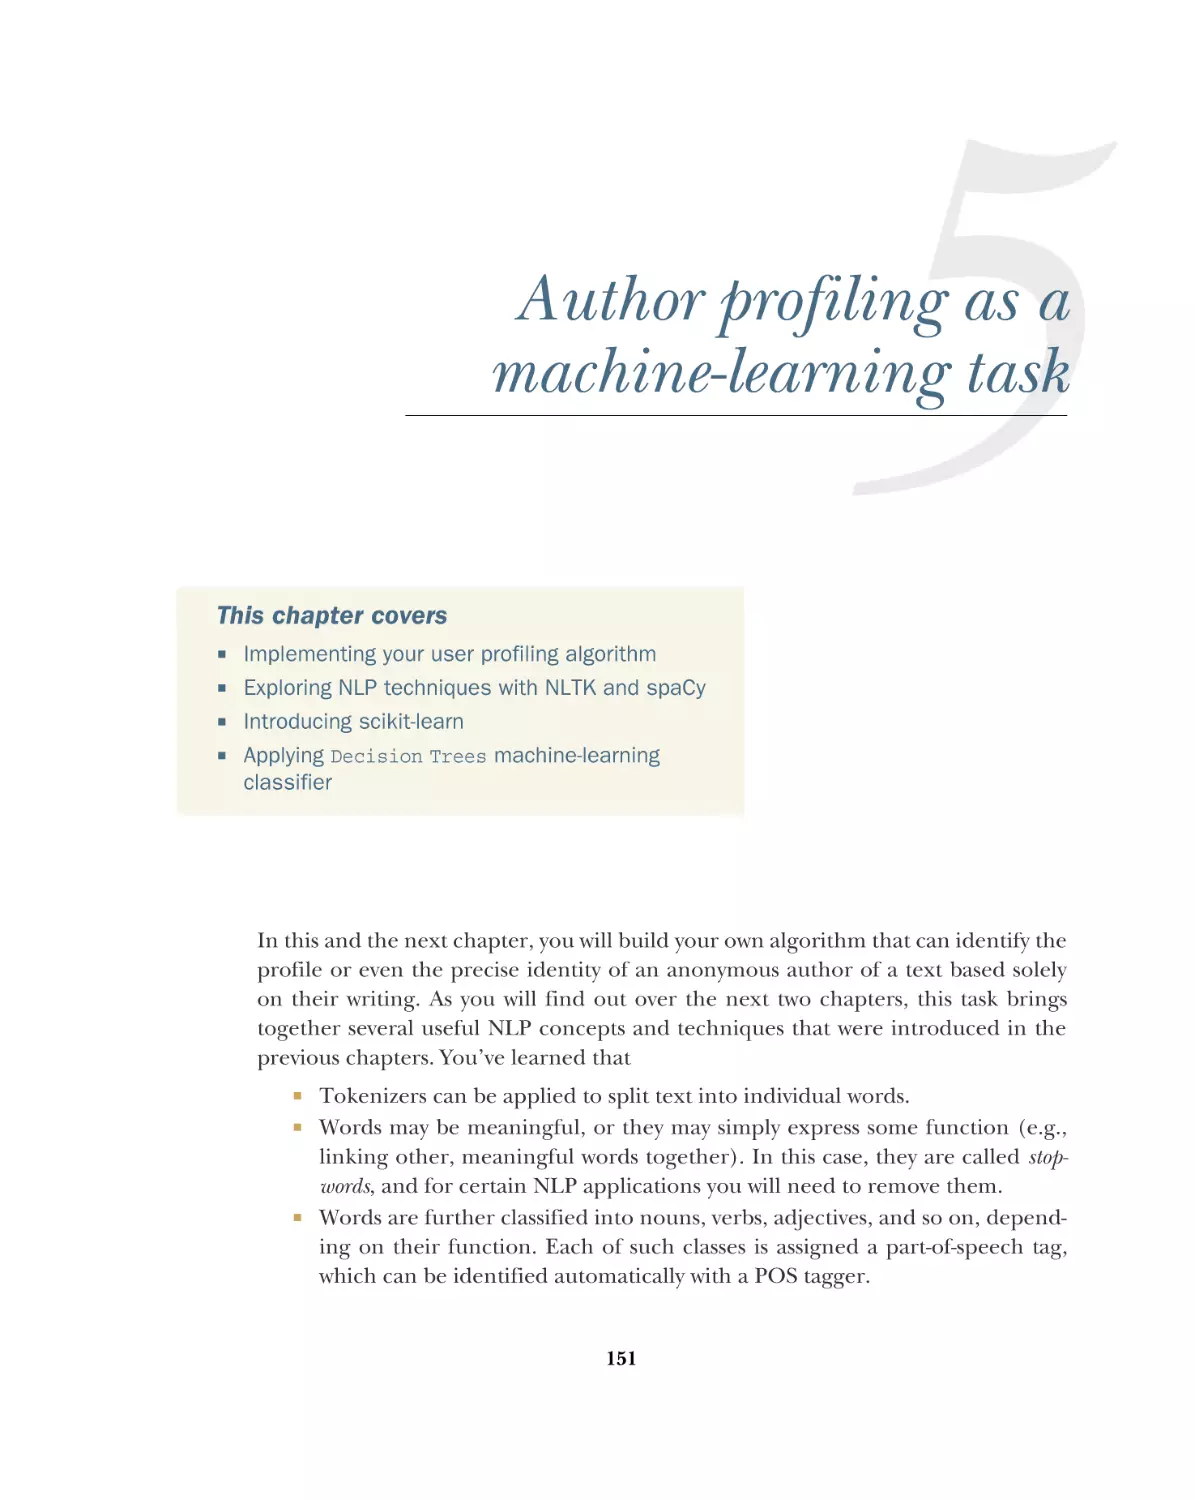 5 Author profiling as a machine-learning task